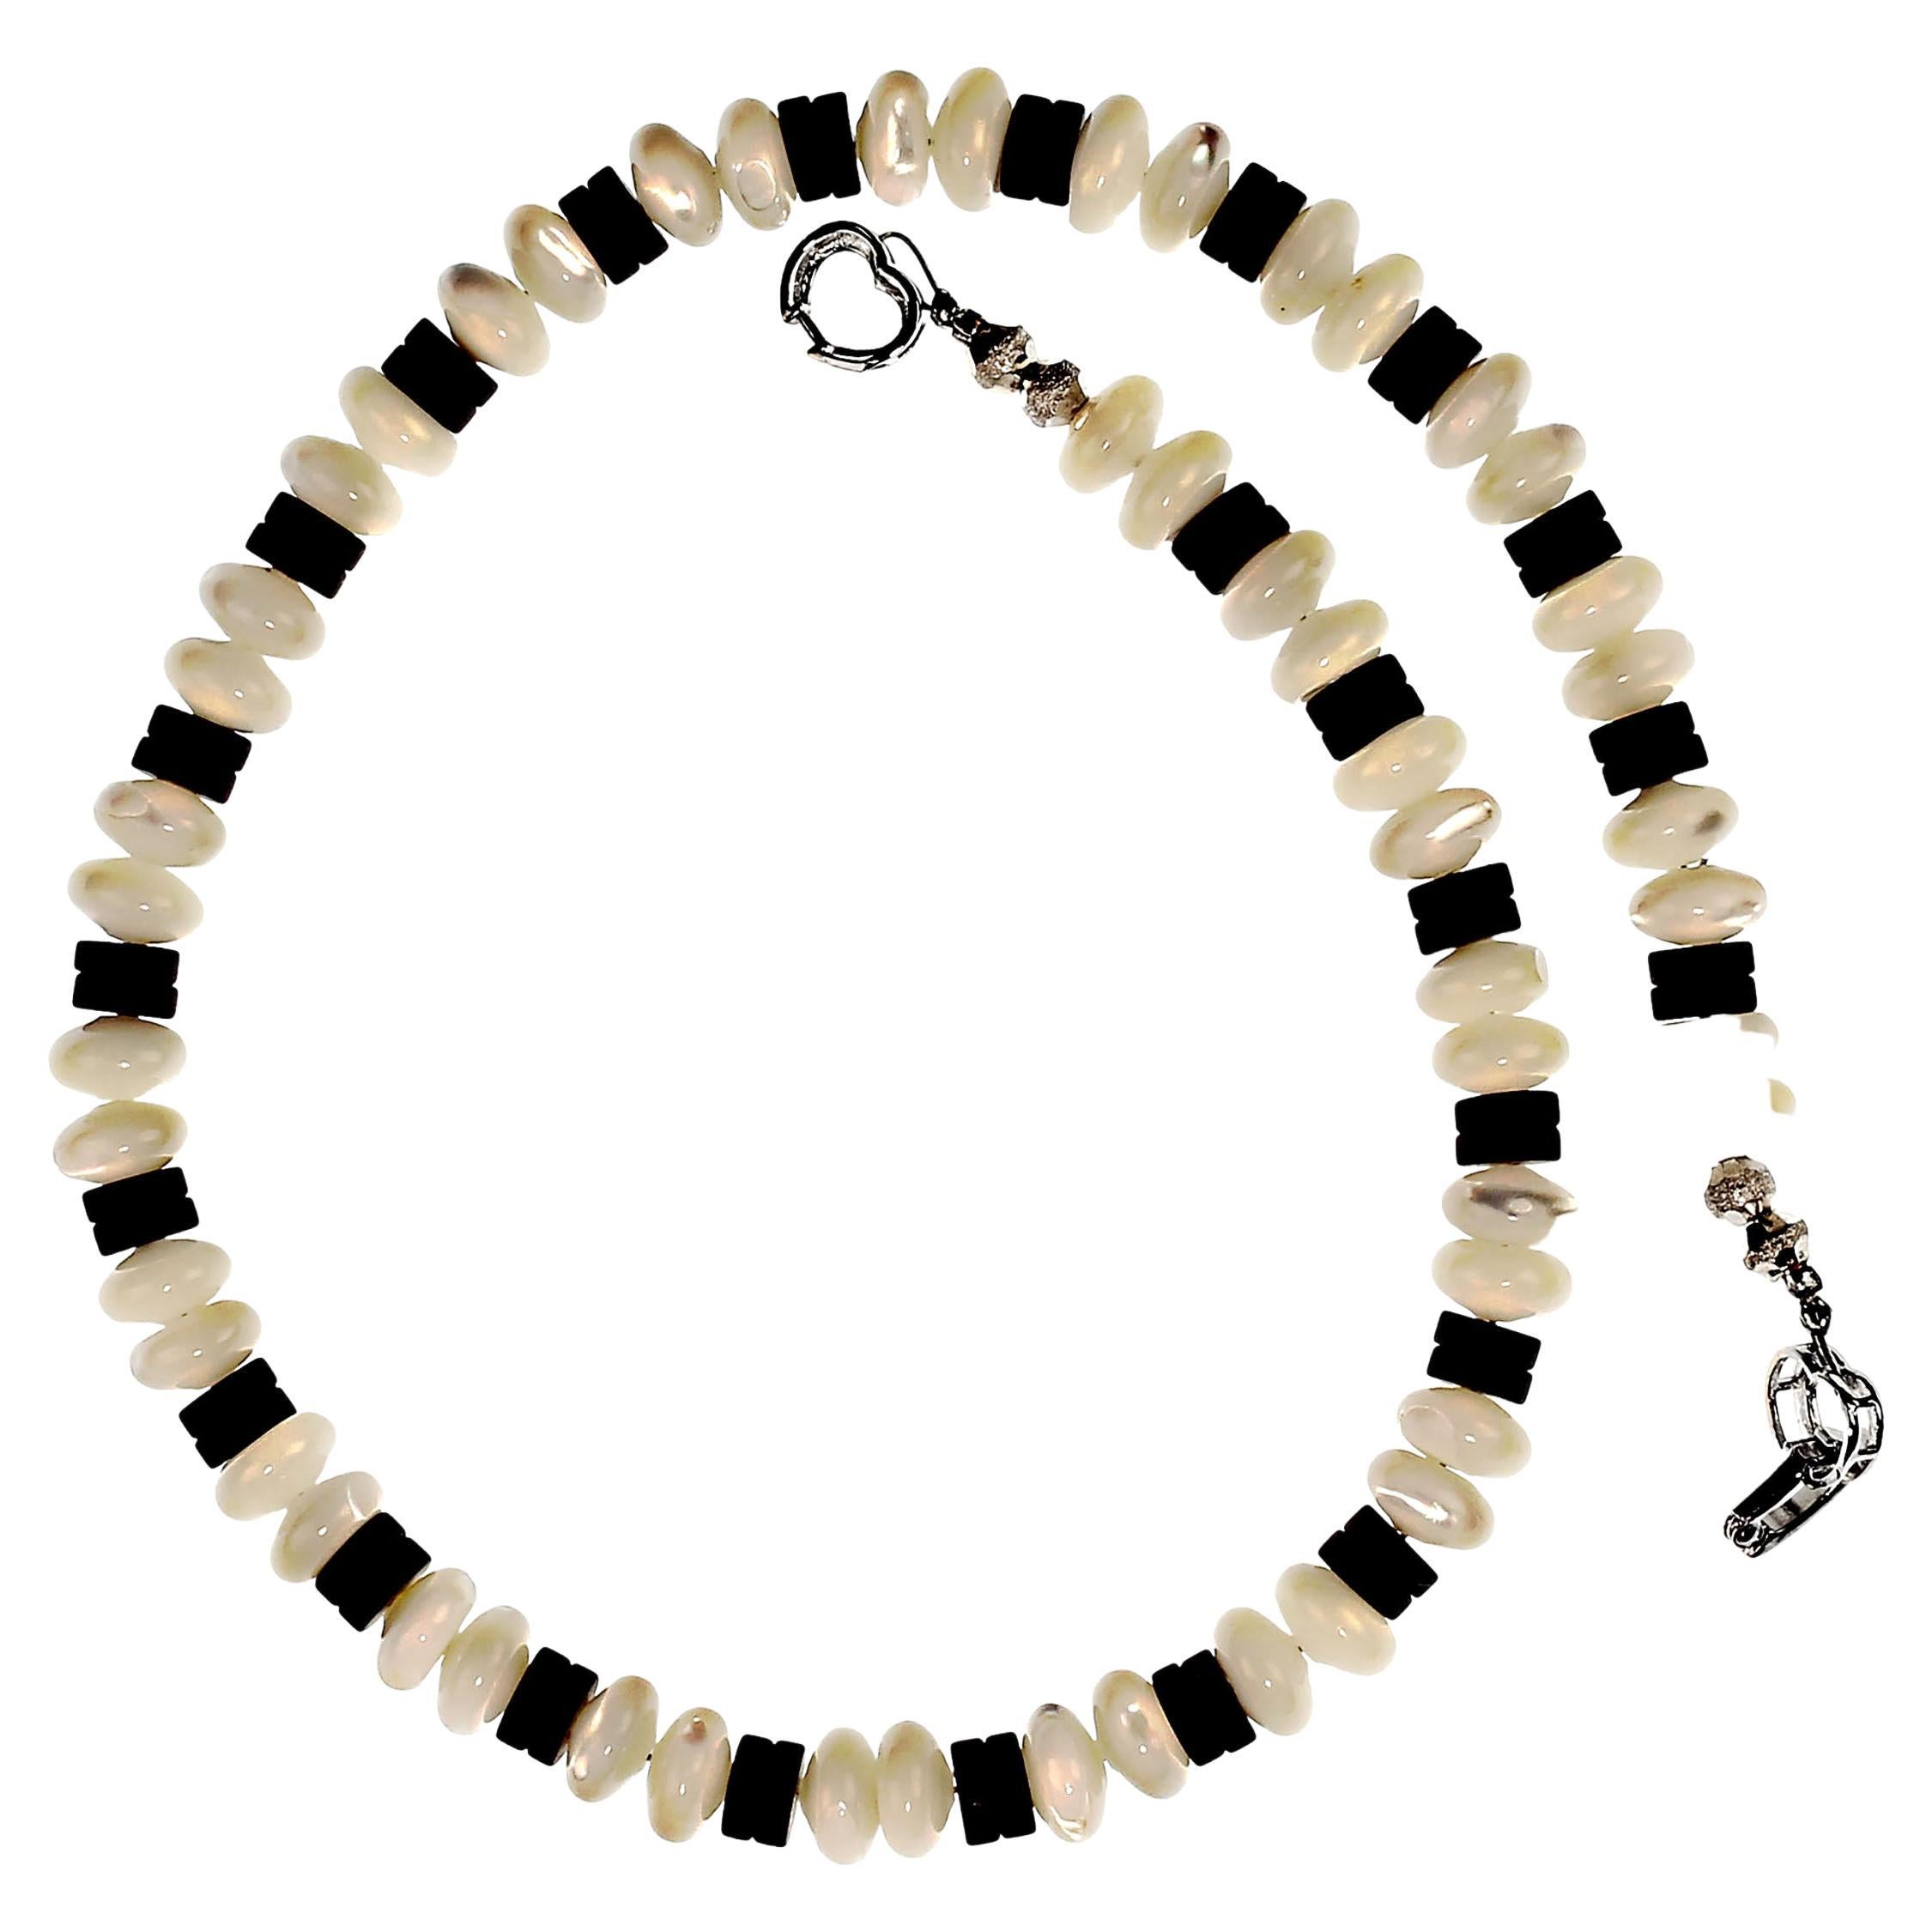 Handmade choker necklace of Mother of Pearl and frosted Black Onyx.  This unique 15 inch choker features glowing creamy rondelles of Mother of Pearl with contrasting  rondelles of flat Black Onyx.  This one of a kind choker is secured with a rhodium